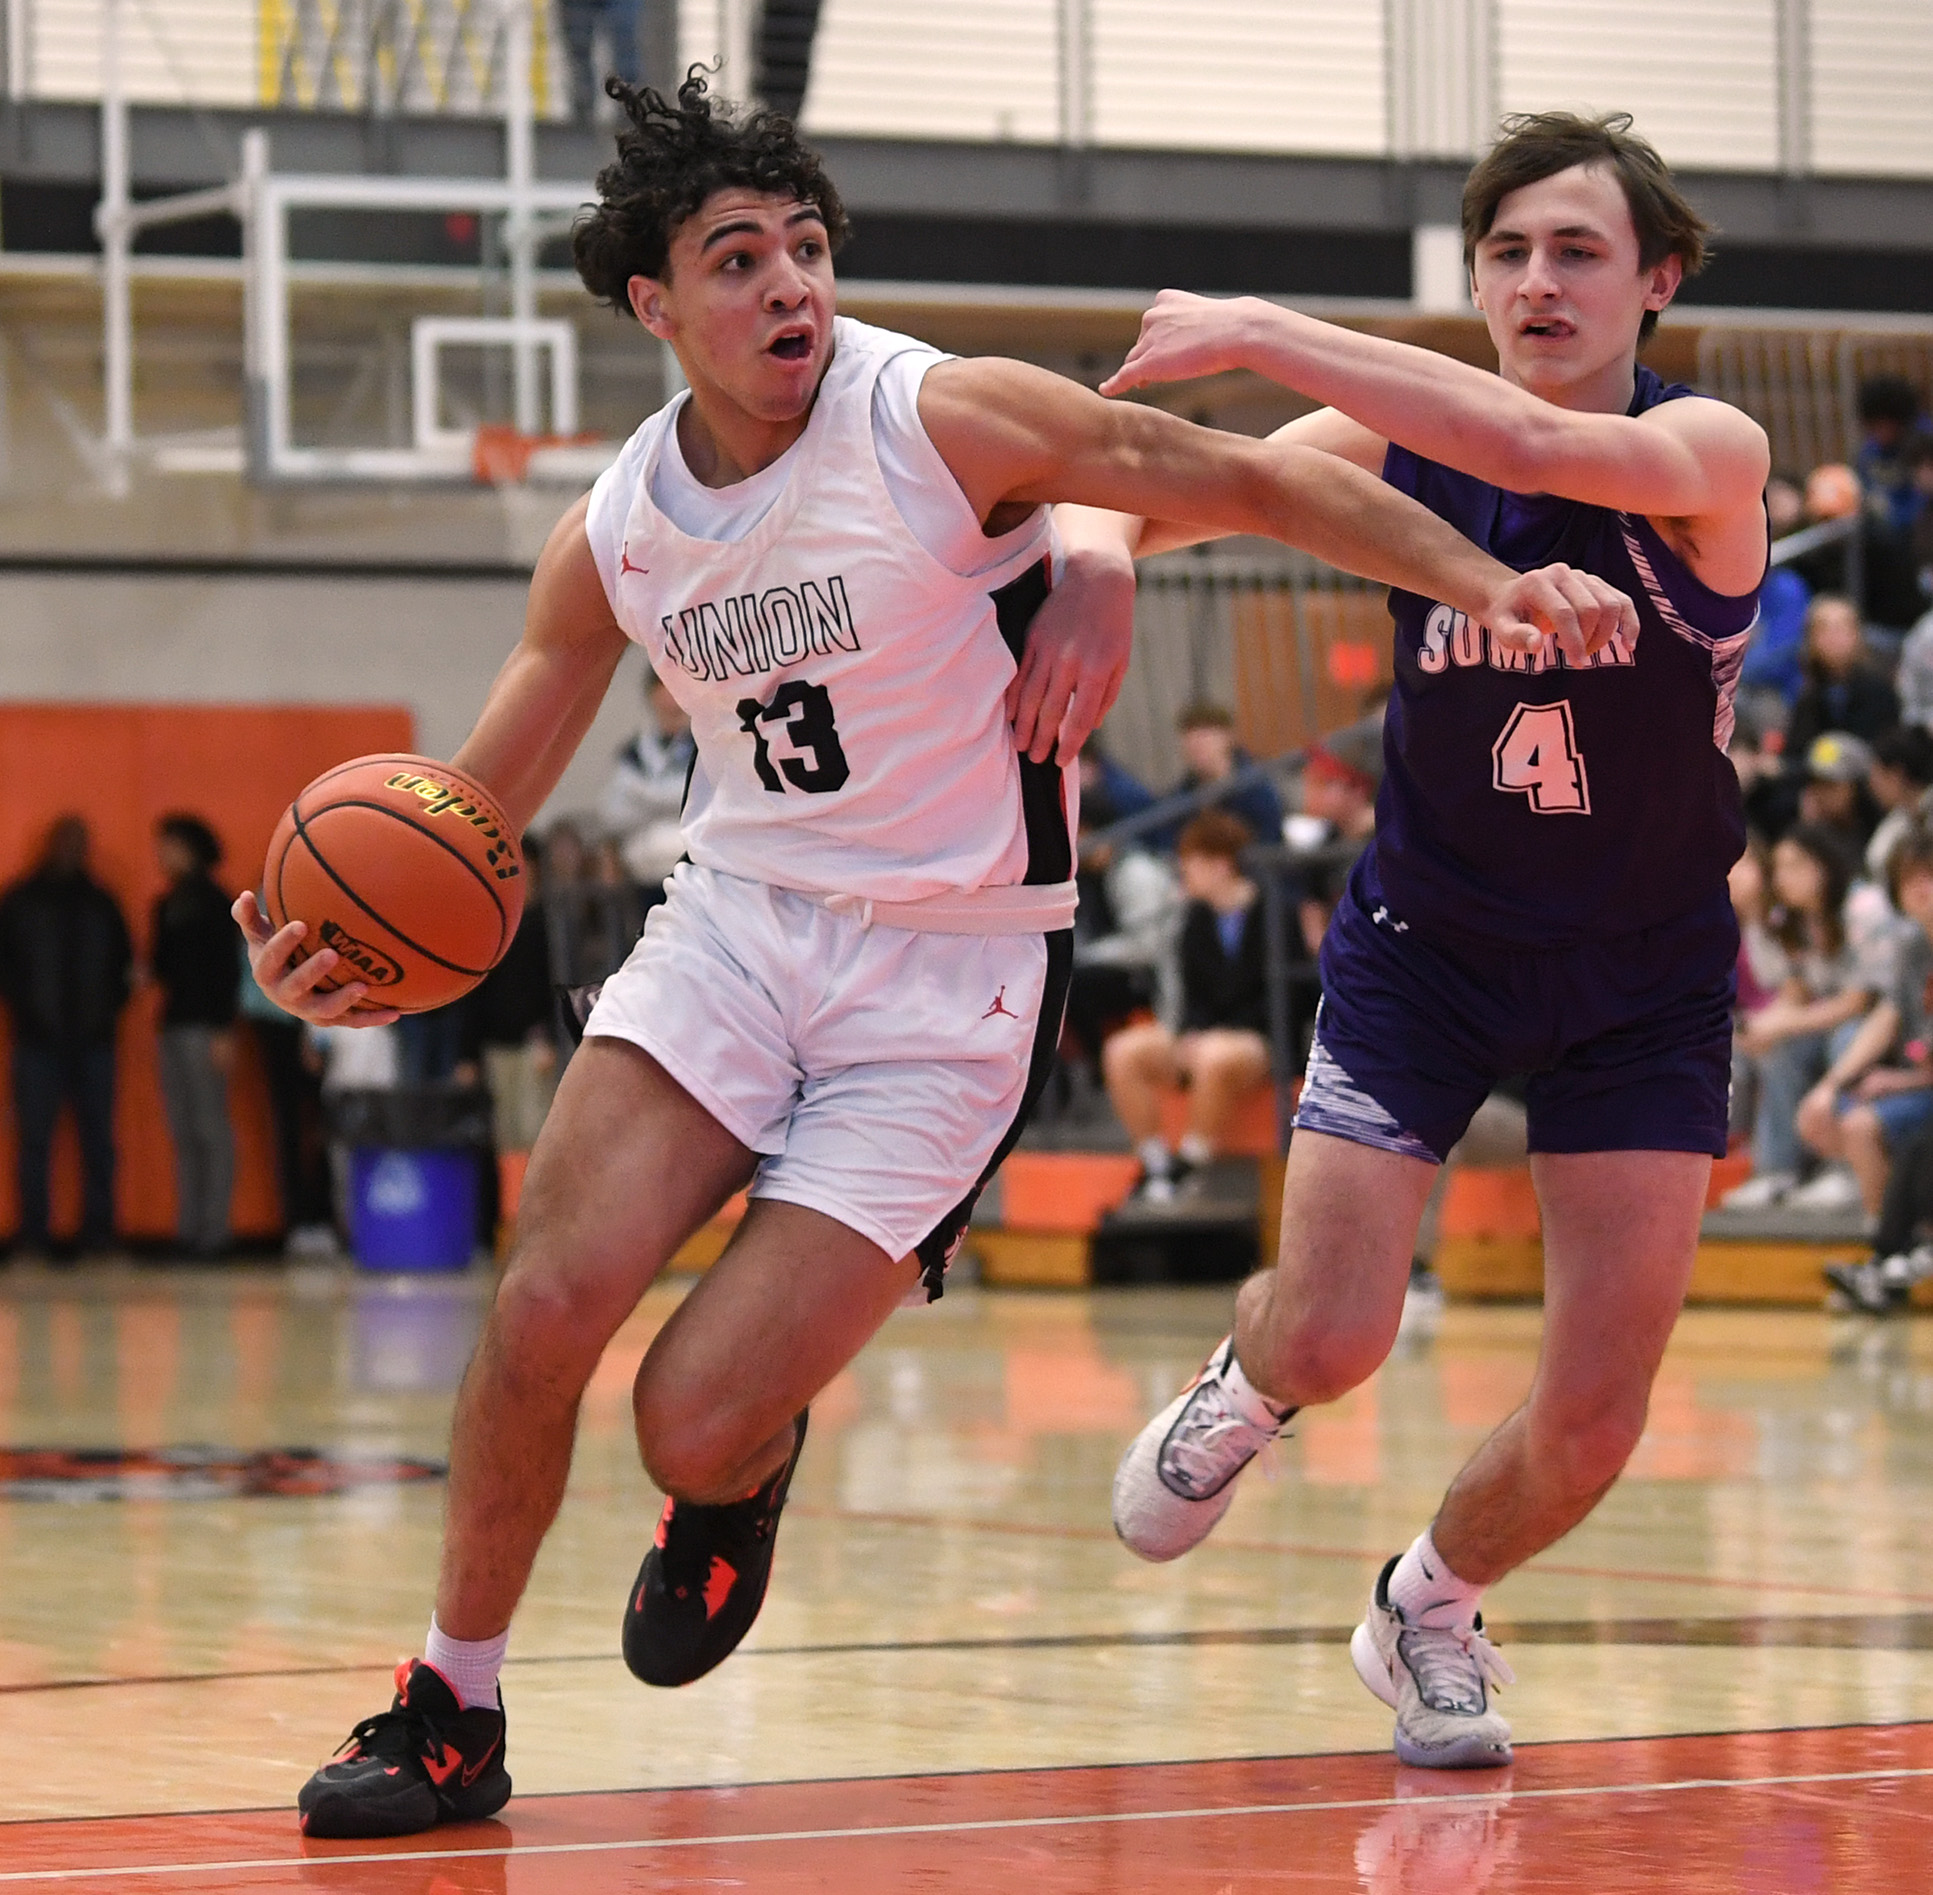 Union senior Yanni Fassilis, left, drives to the basket under pressure from Sumner sophomore Jaylen Hyppa on Saturday, Feb. 25, 2023, during the Titans’ 67-40 at Battle Ground High School.